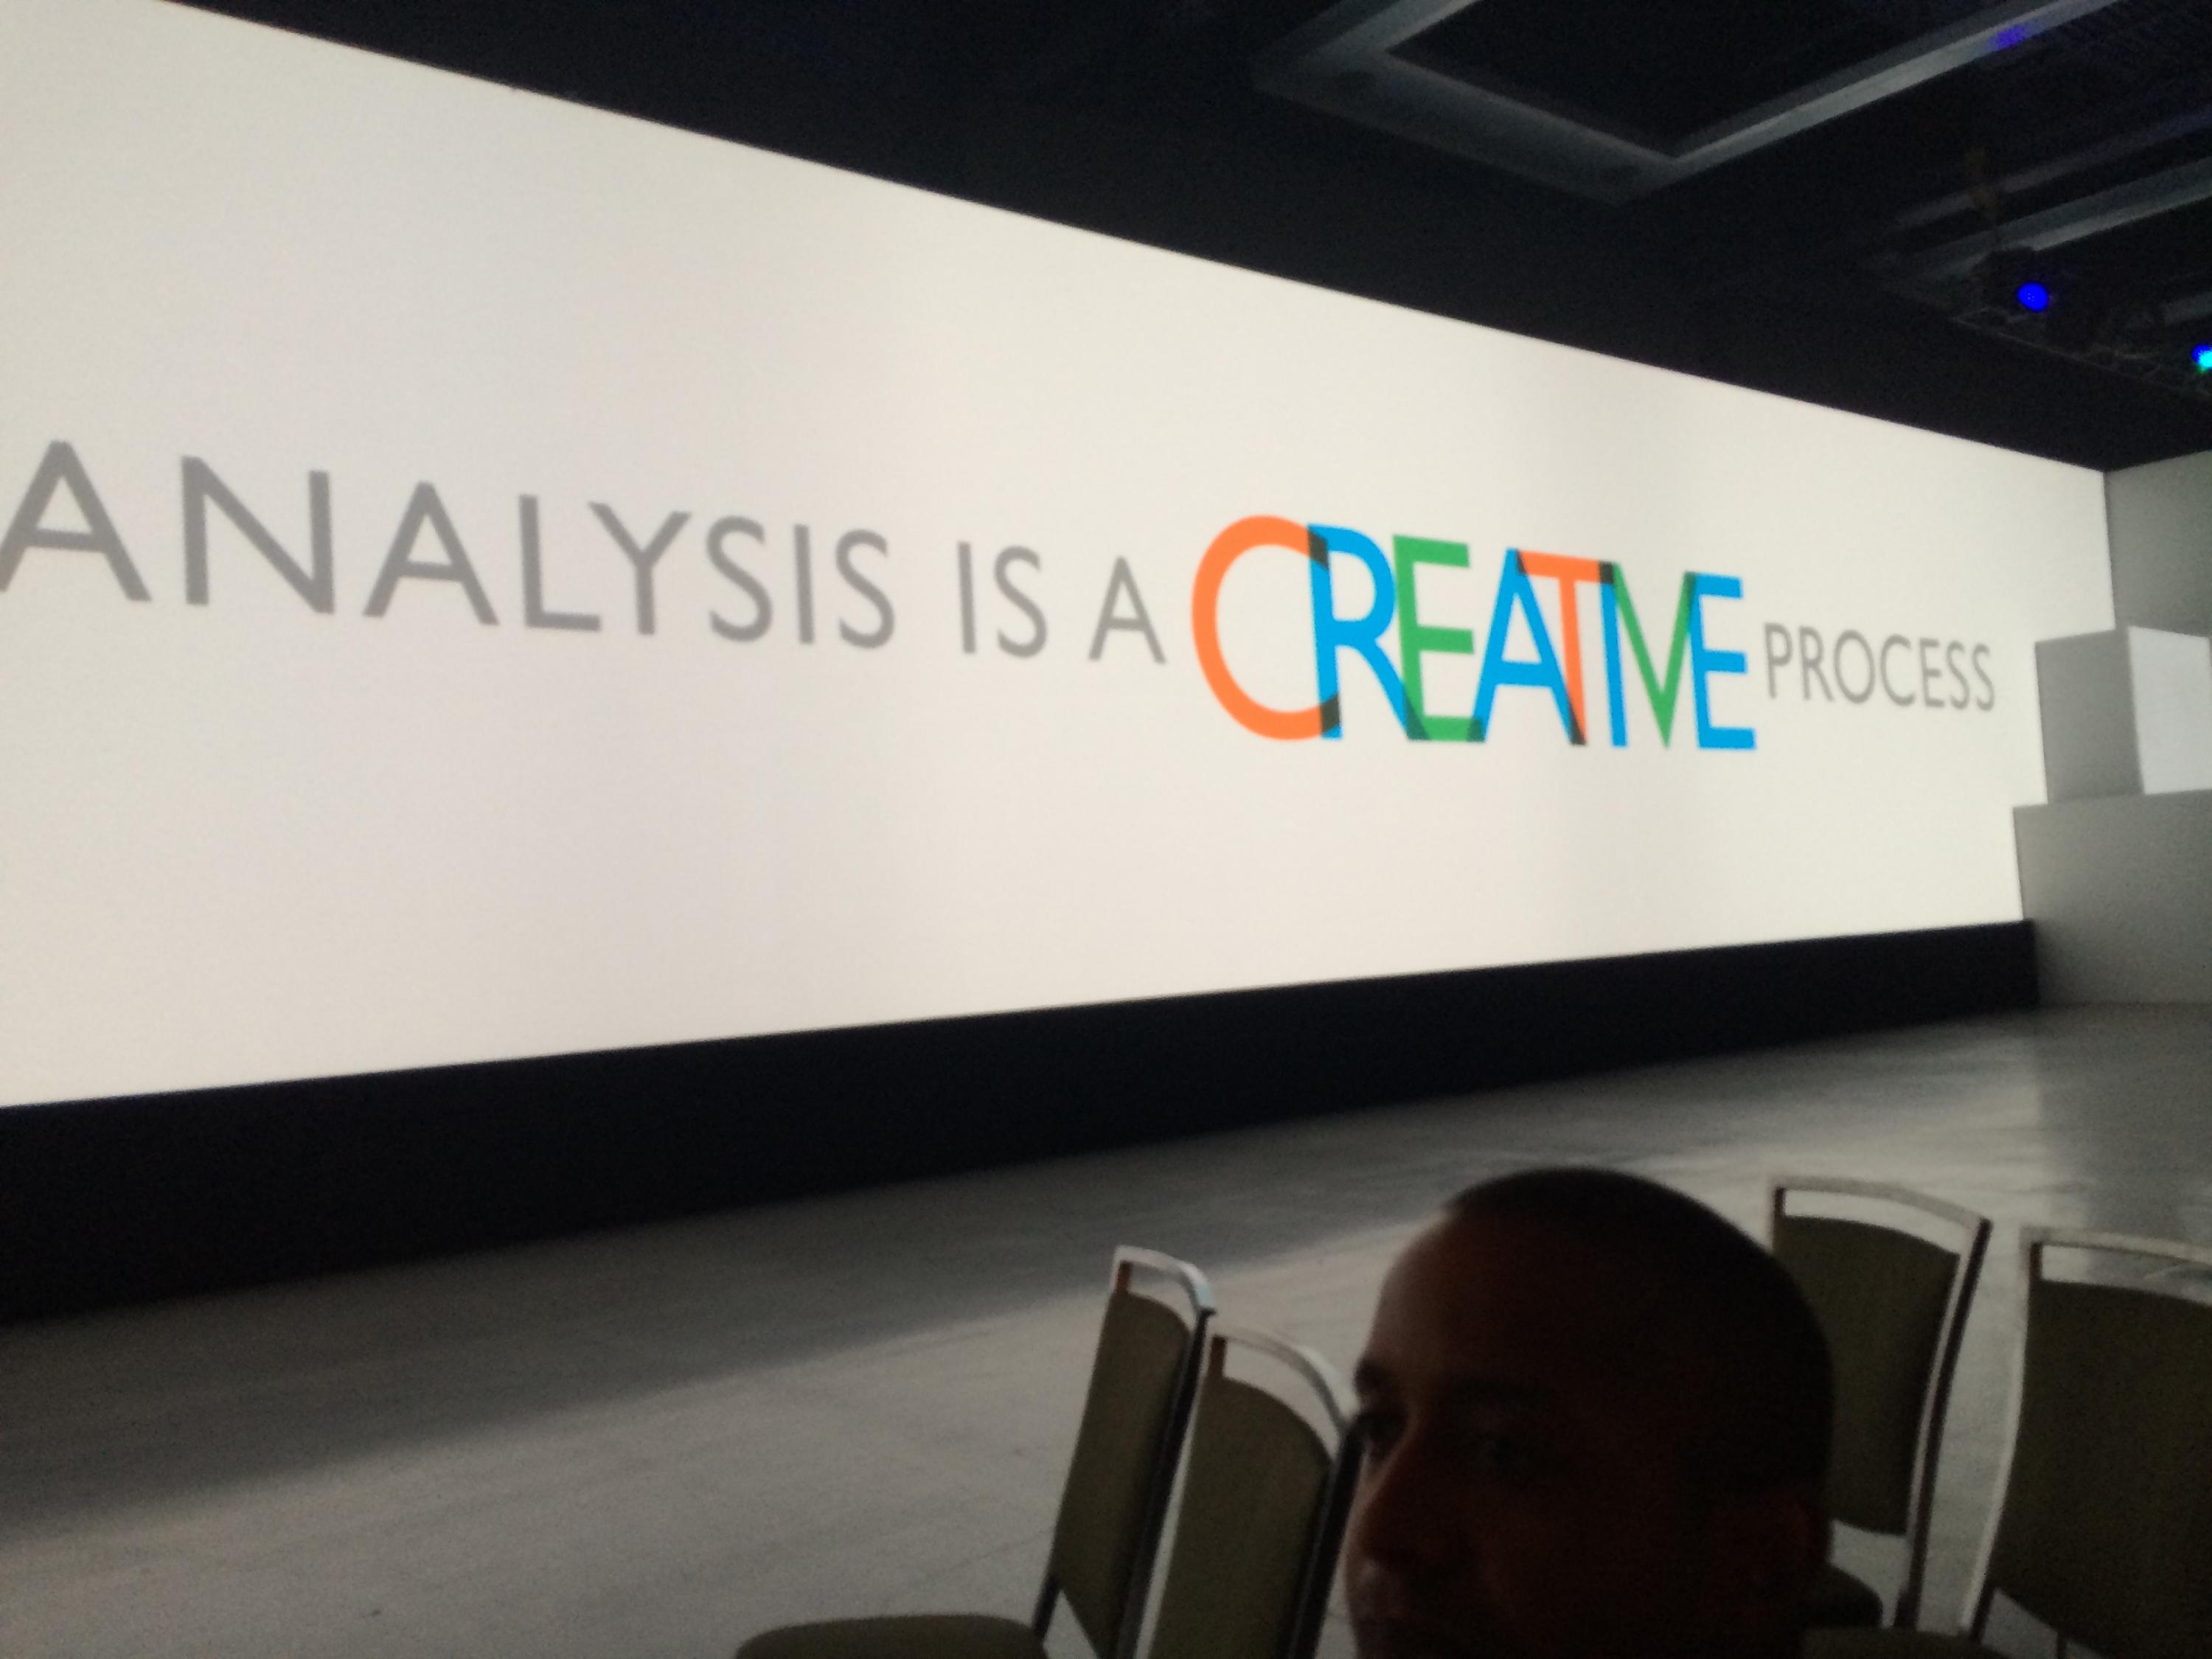 Analysis is a creative process.